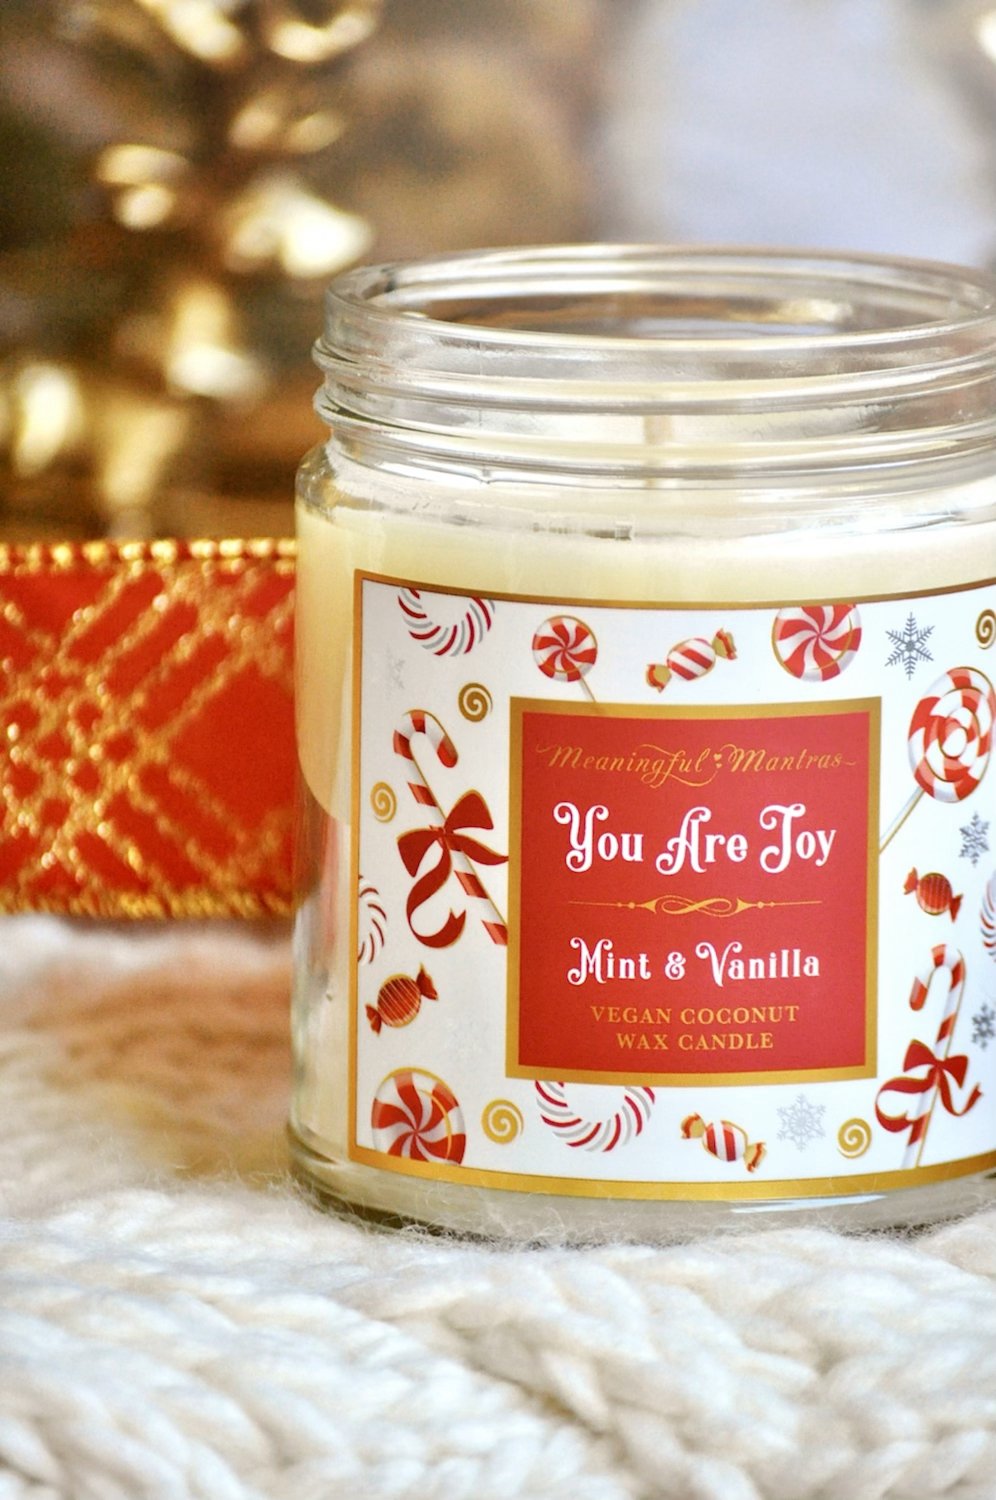 You Are Joy Mint & Vanilla Candle